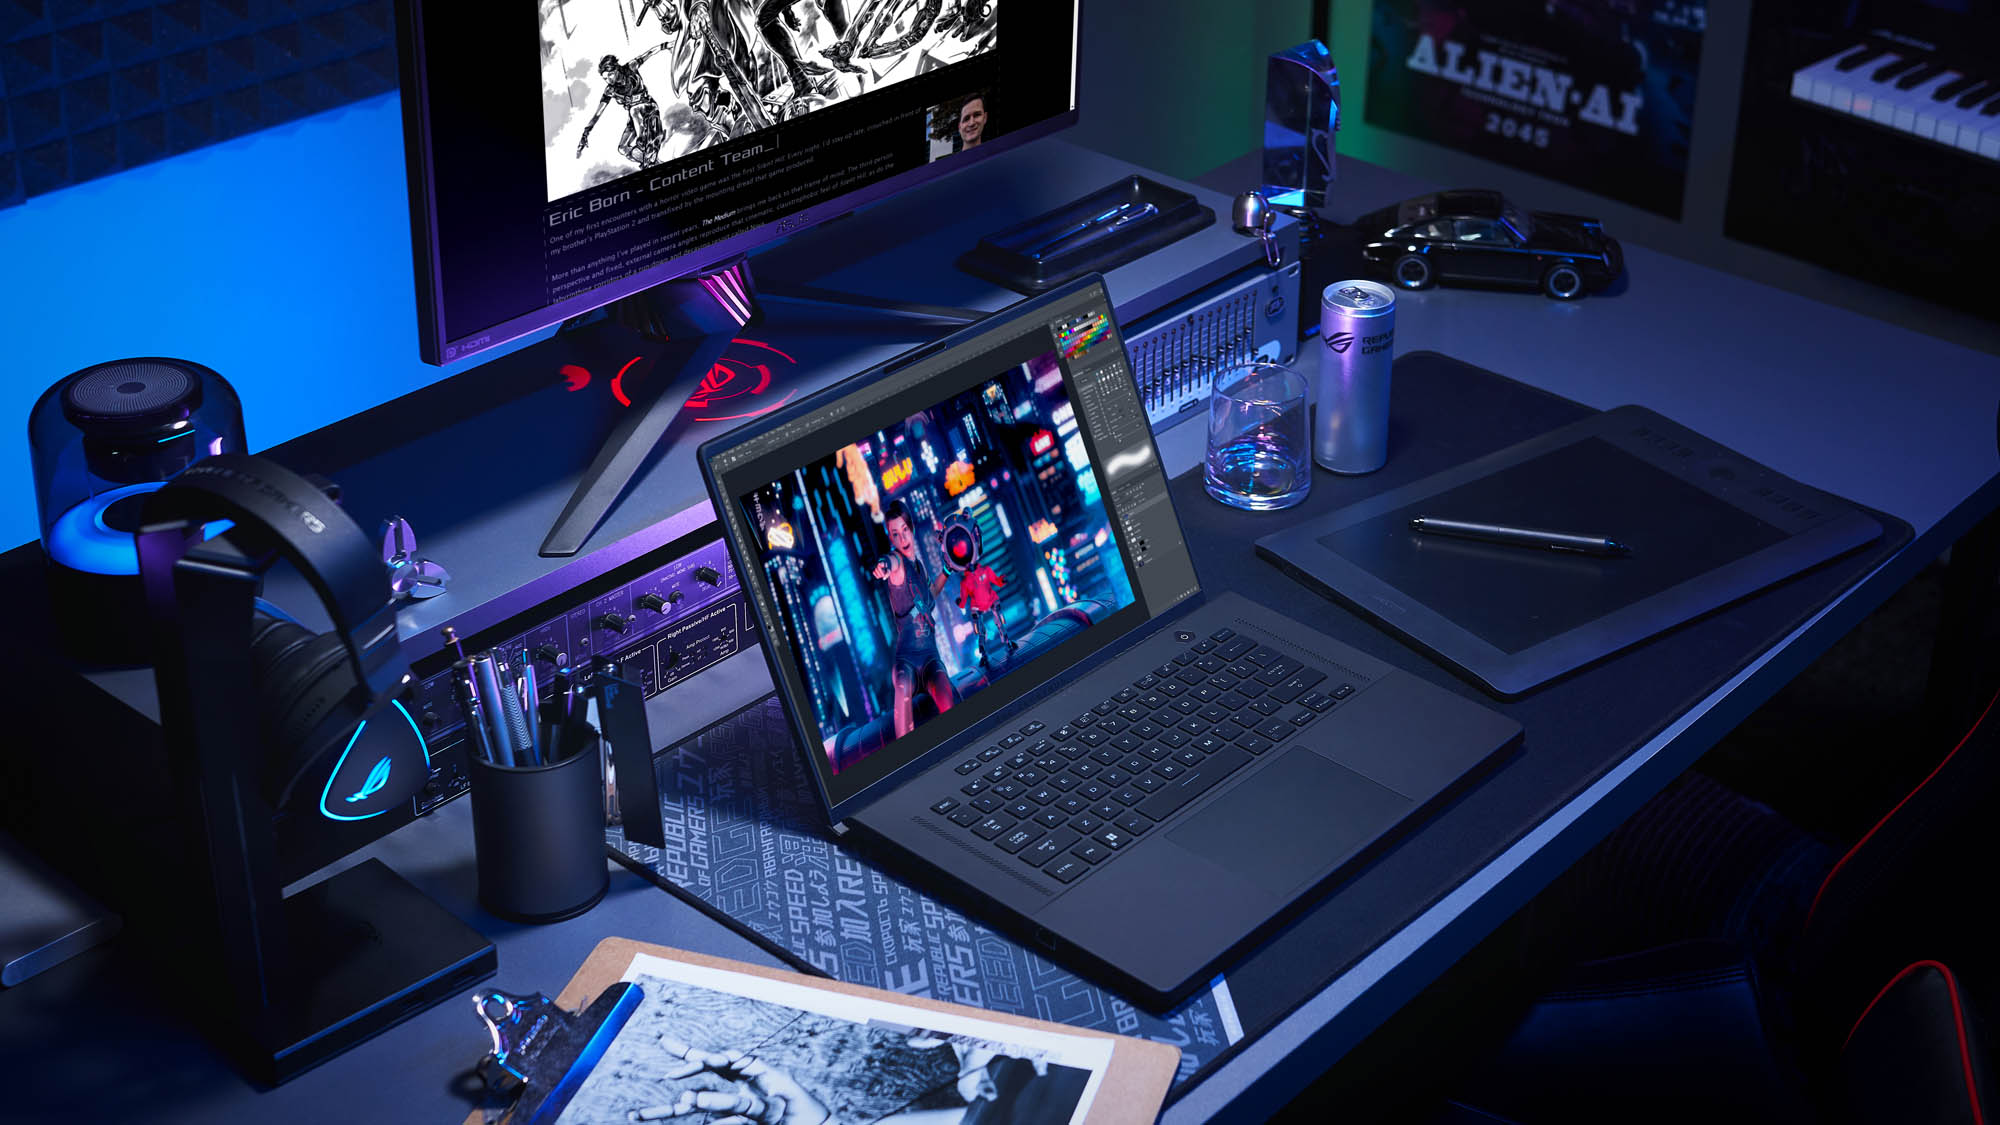 A photo of the Zephyrus M16 laptop on a desk, surrounded by drawings and other creative gear.